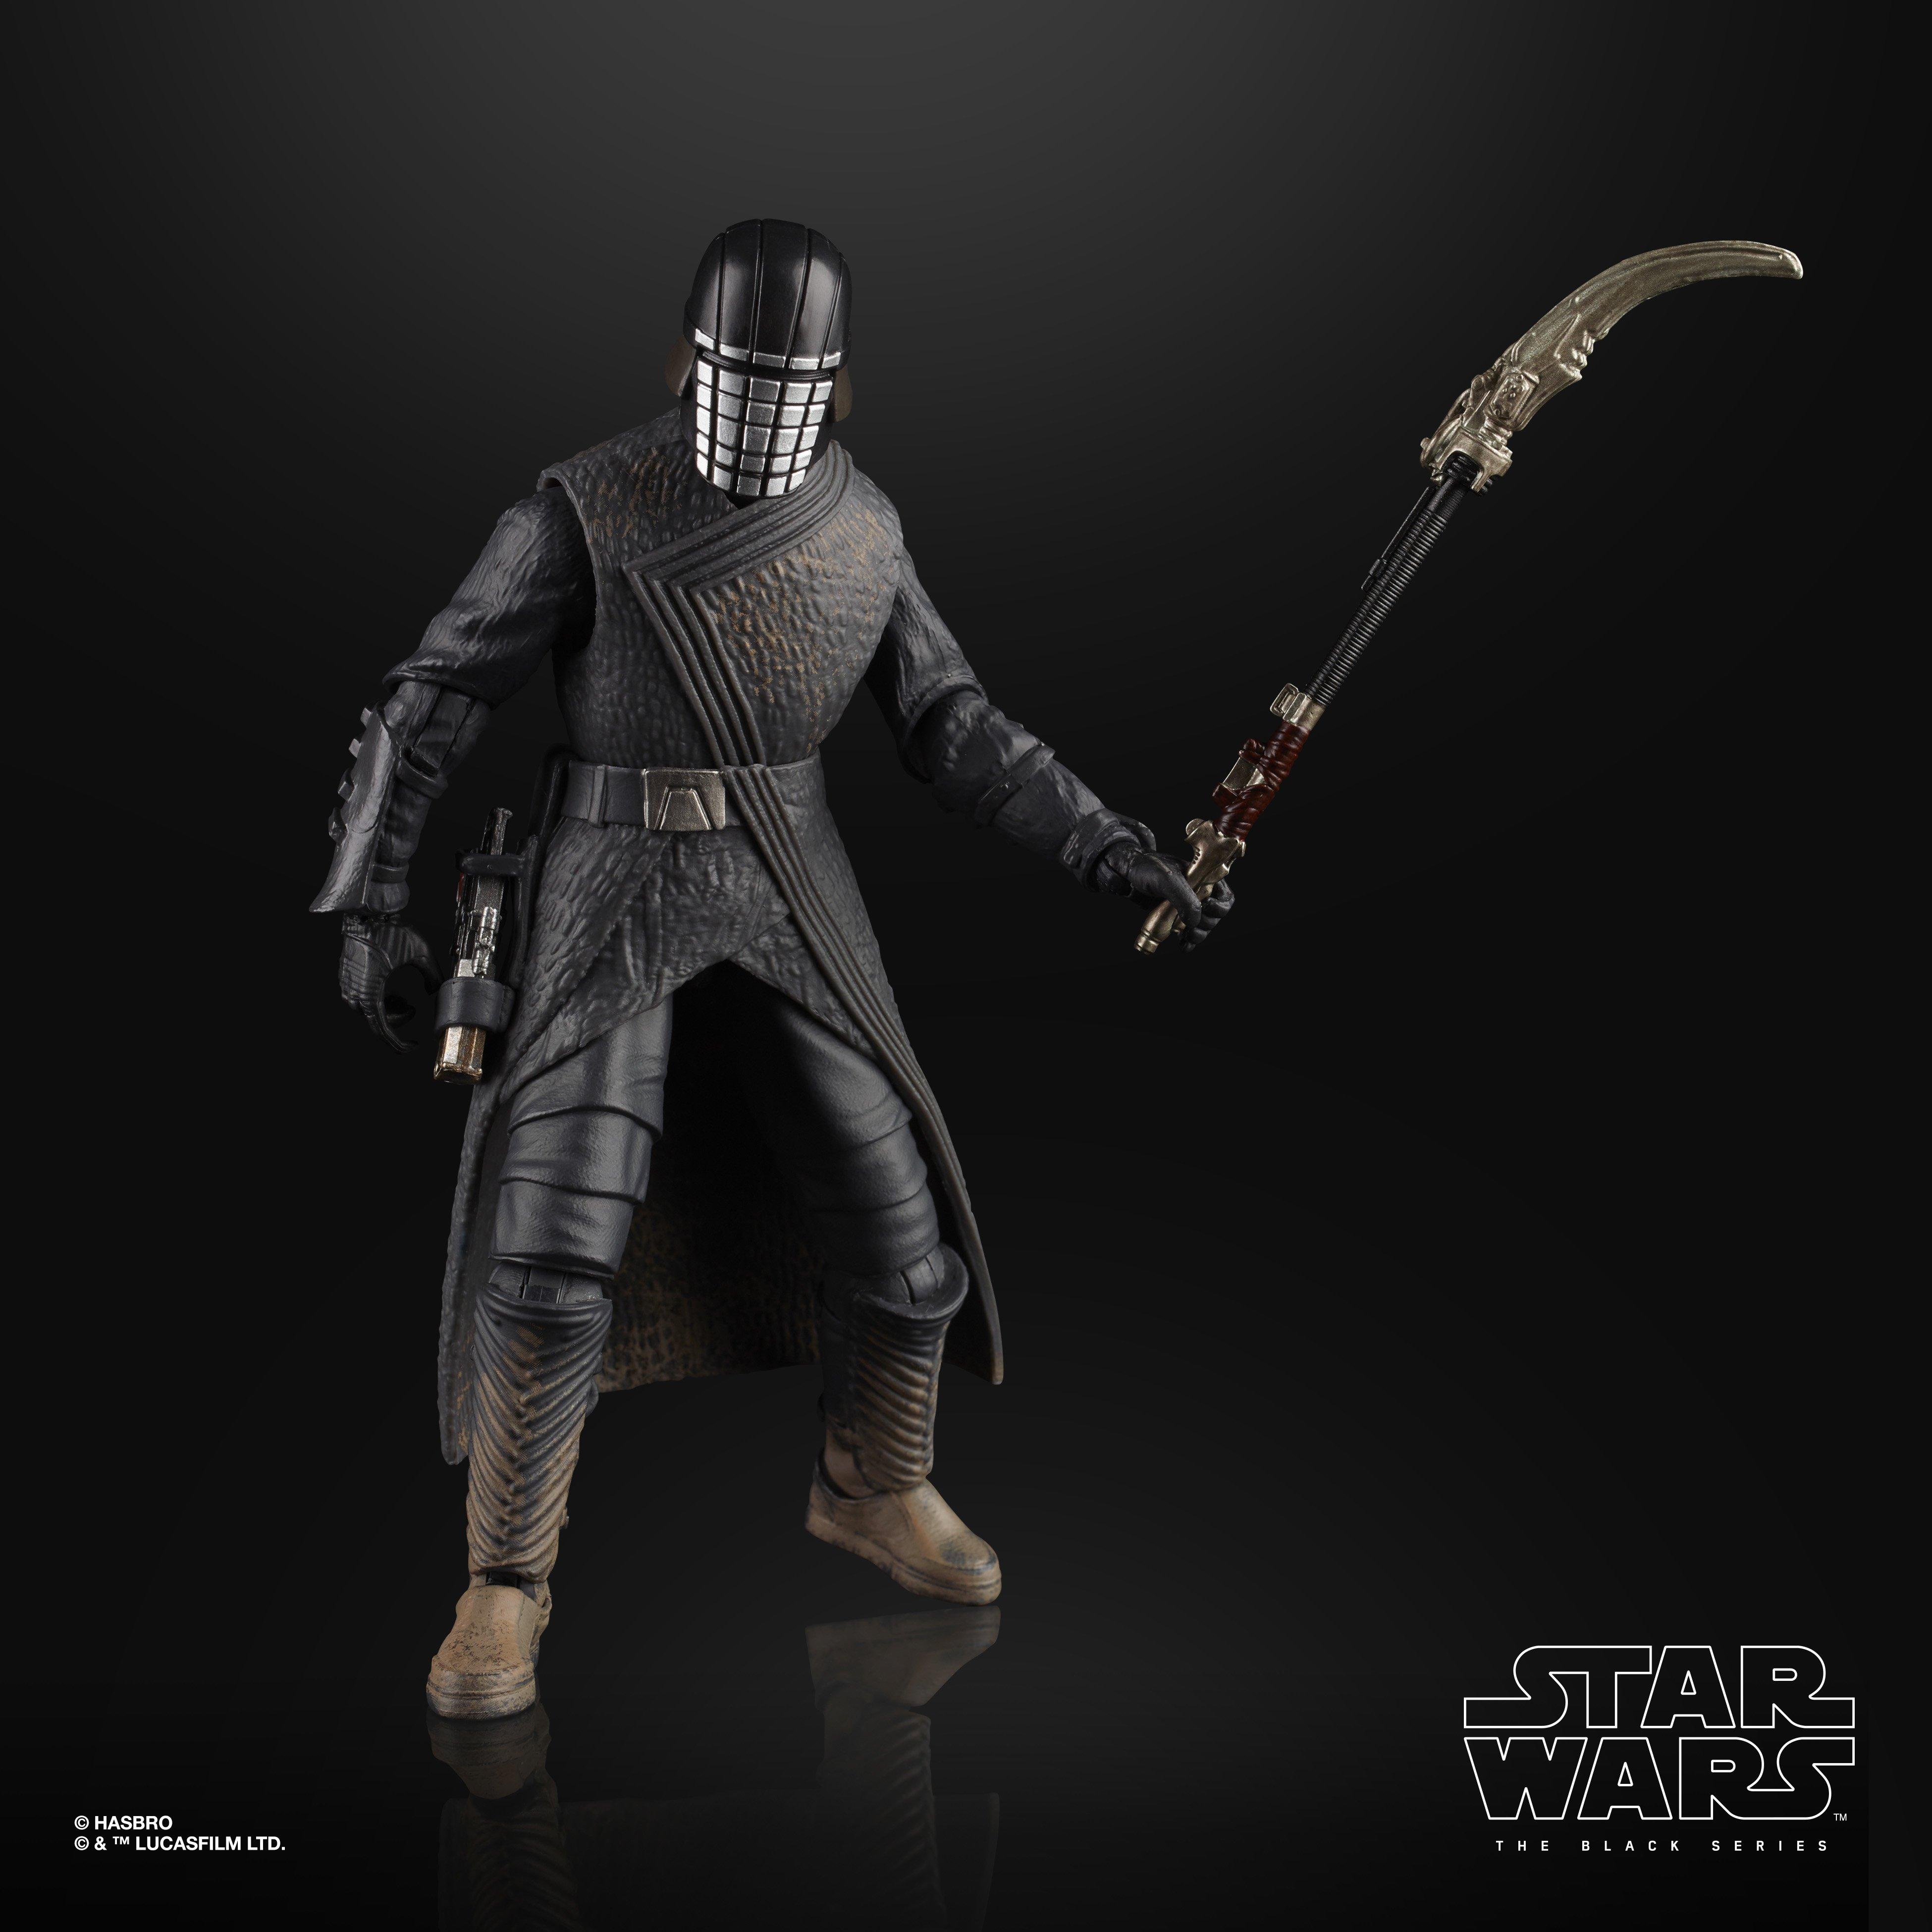 Star Wars Episode IX: The Rise of Skywalker Knight of Ren The Black Series Action Figure